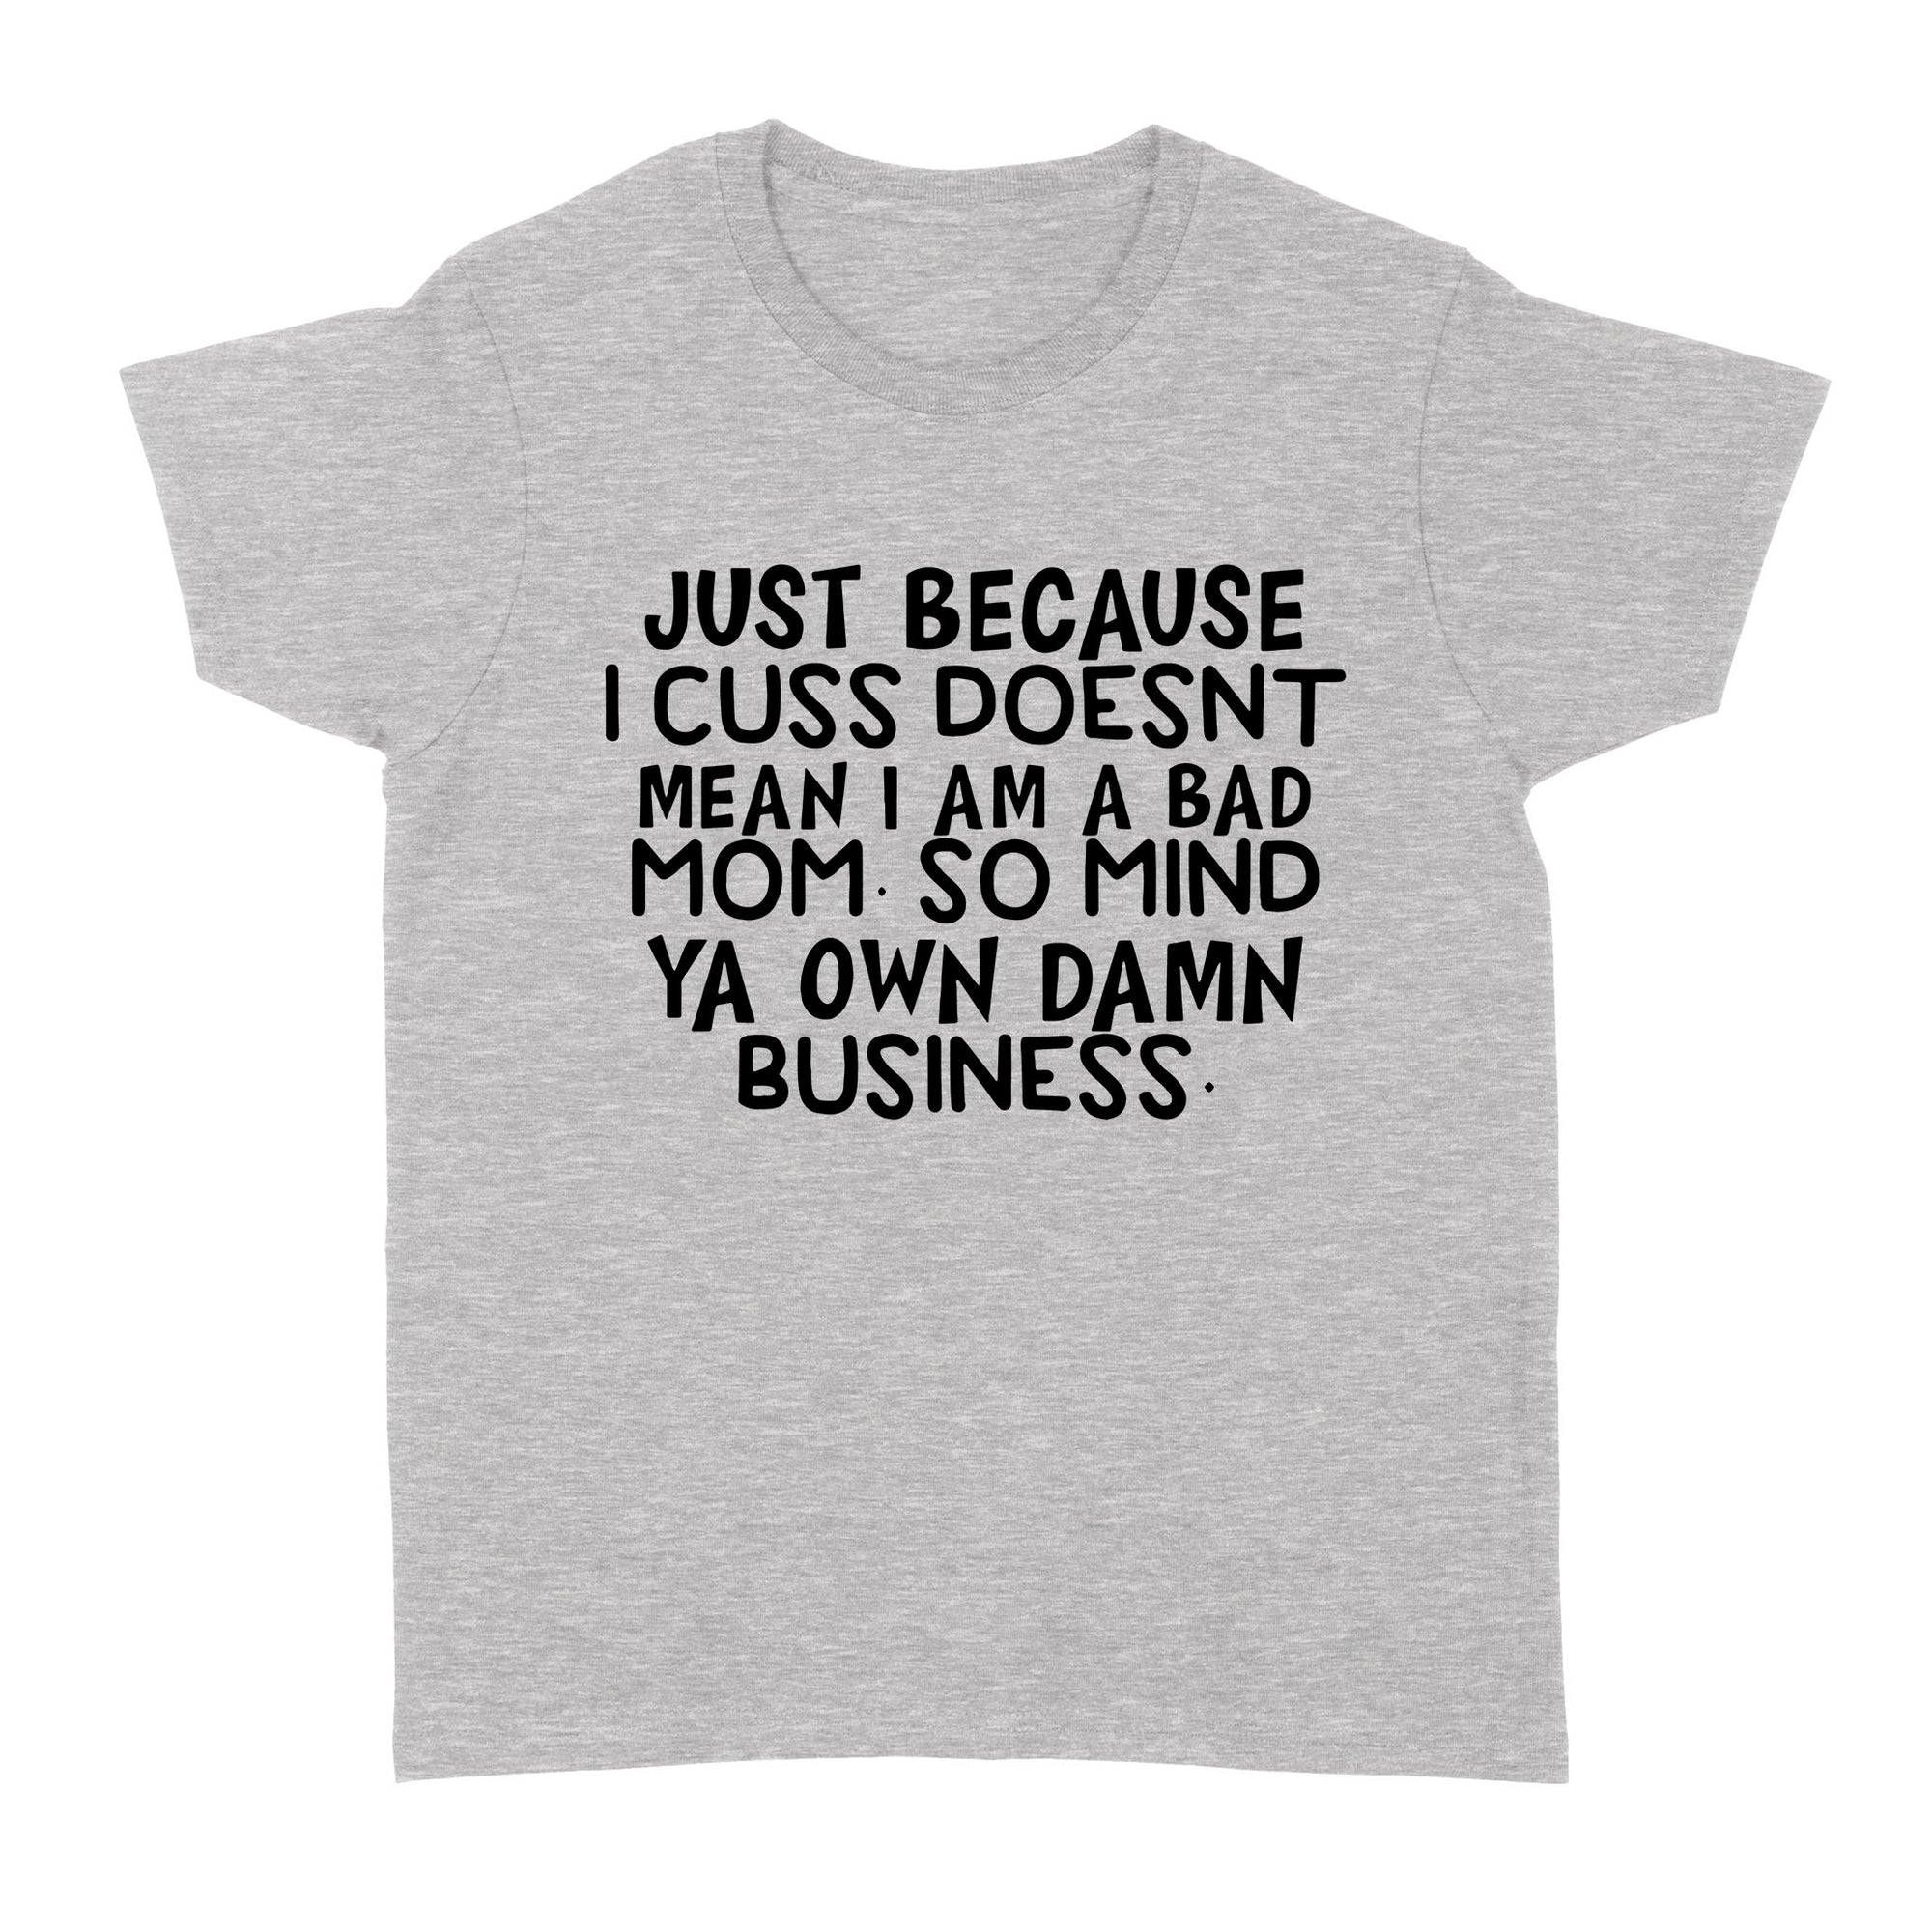 Gift Ideas for Mom Mothers Day Just Because I Cuss Doesn't Mean I Am A Bad Mom So Mind Ya Own Damn Business - Standard Women's T-shirt